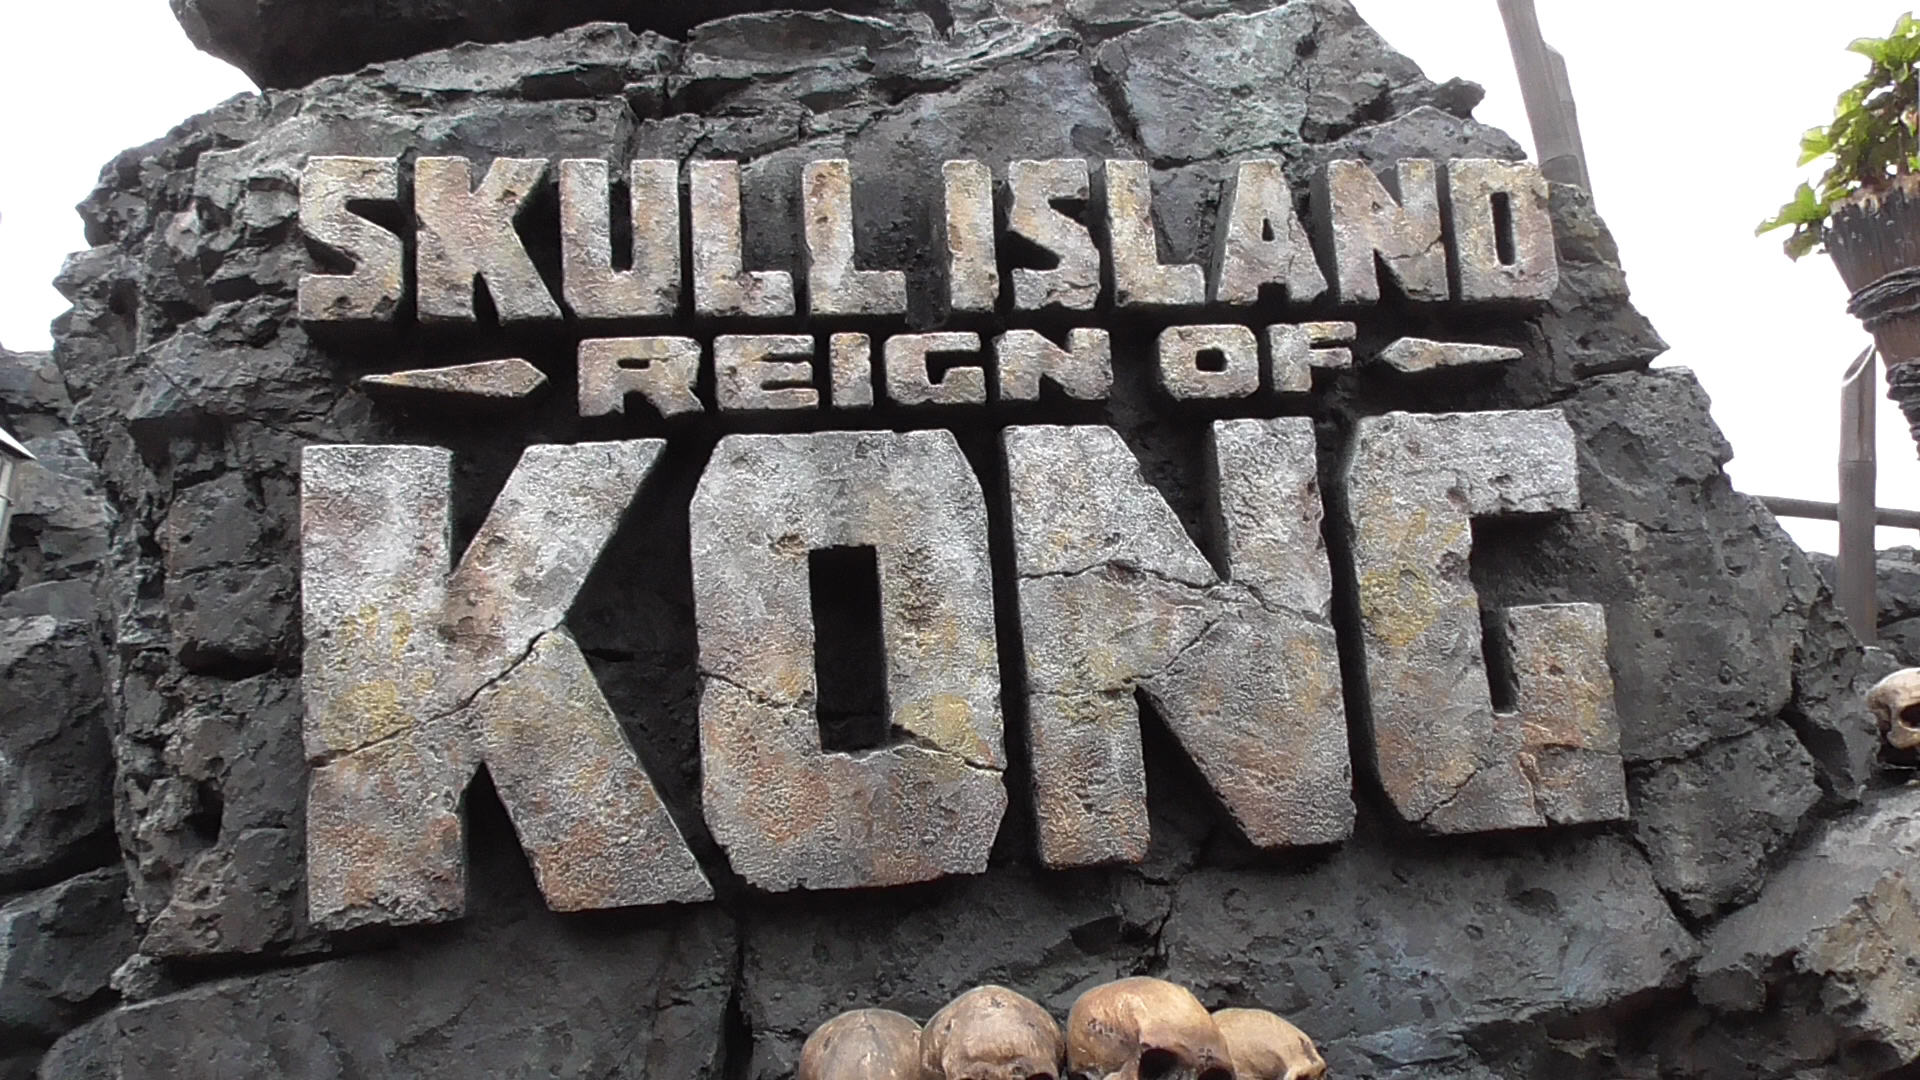 Skull Island: Reign of Kong Ride Construction Update – Coaster Nation